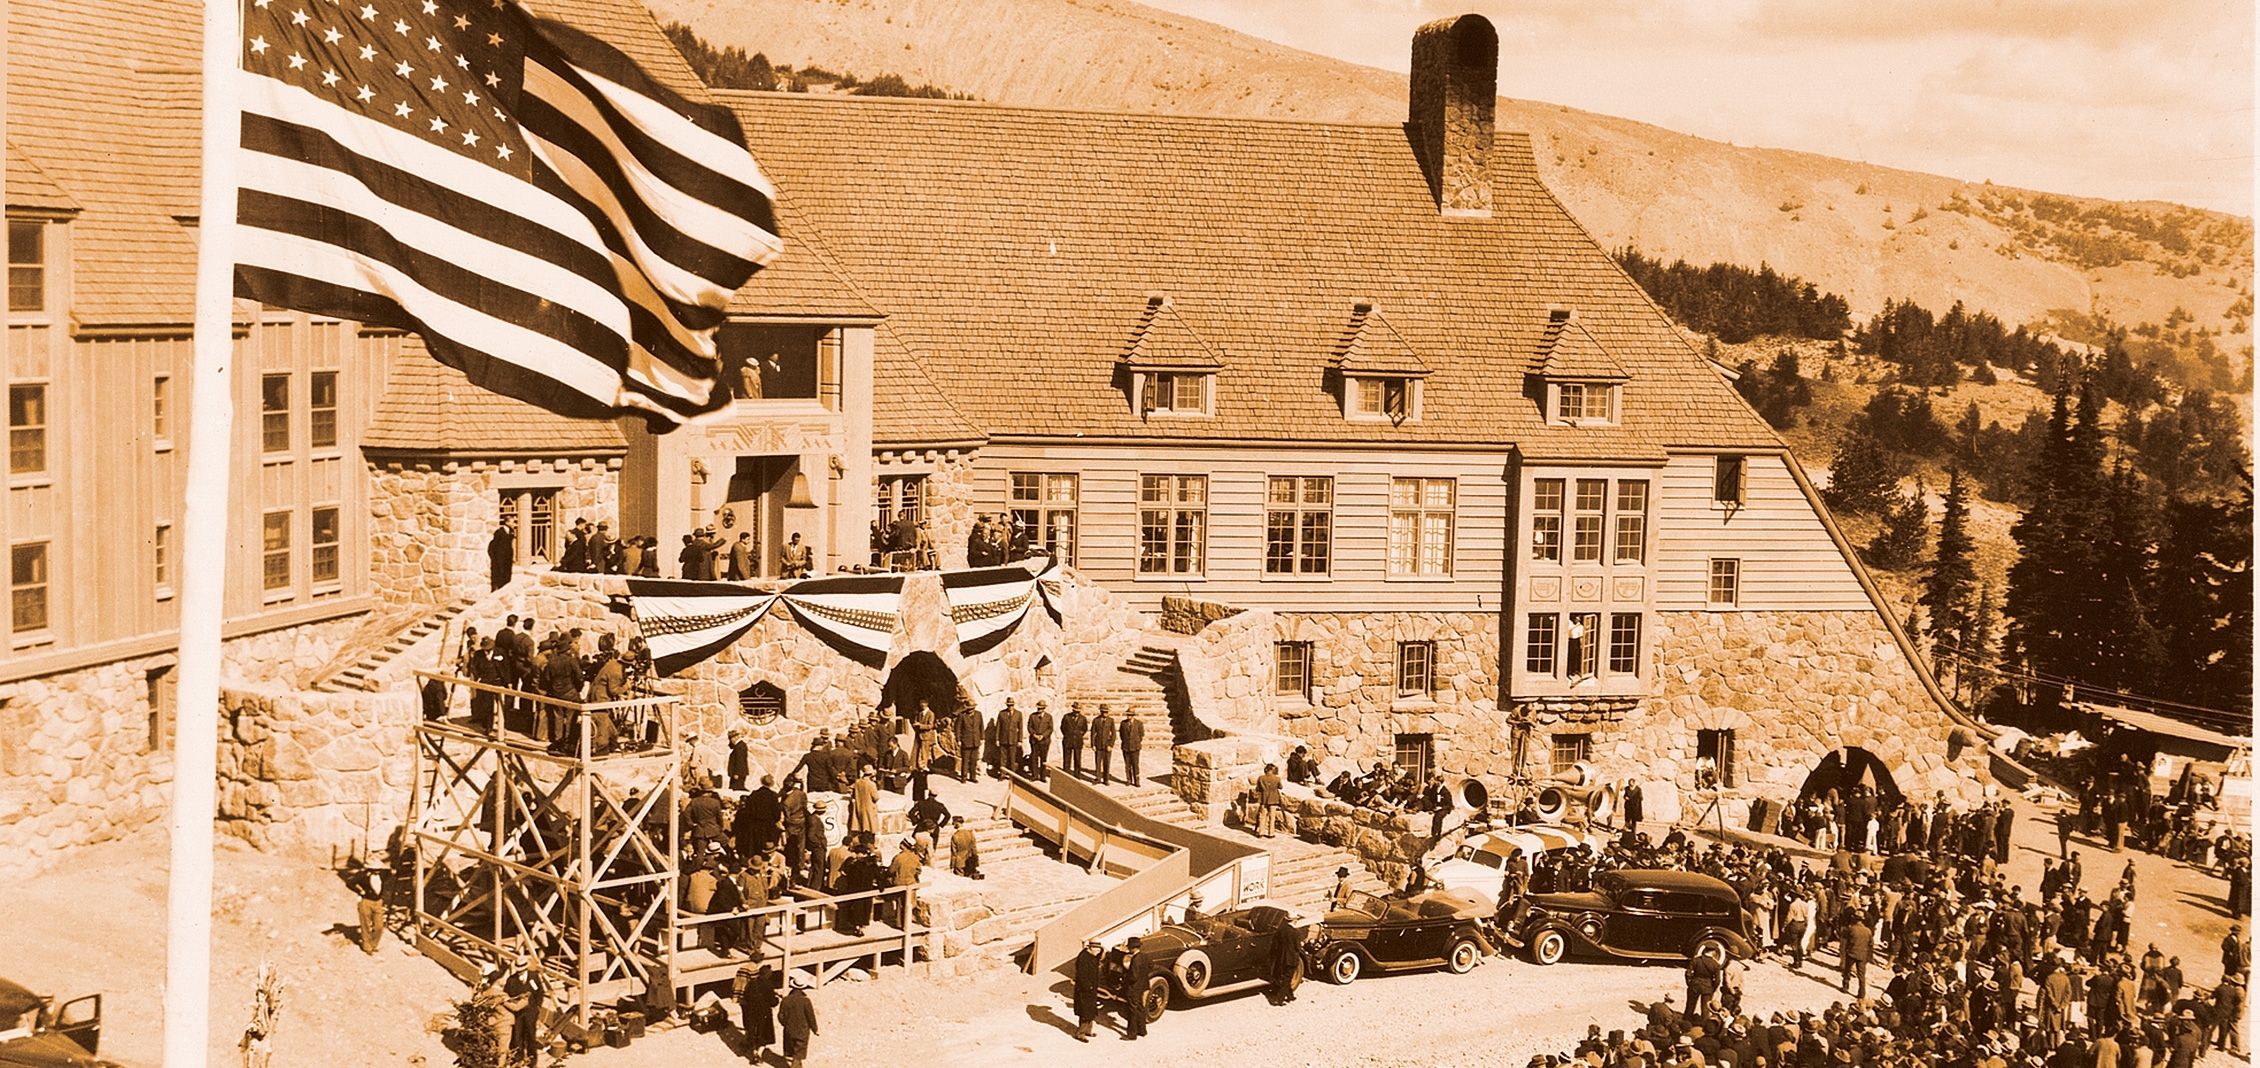 Historic photo of FDR dedication of Timberline Lodge with American flag in foreground, vintage cars in front of lodge, and crowd gathering to watch